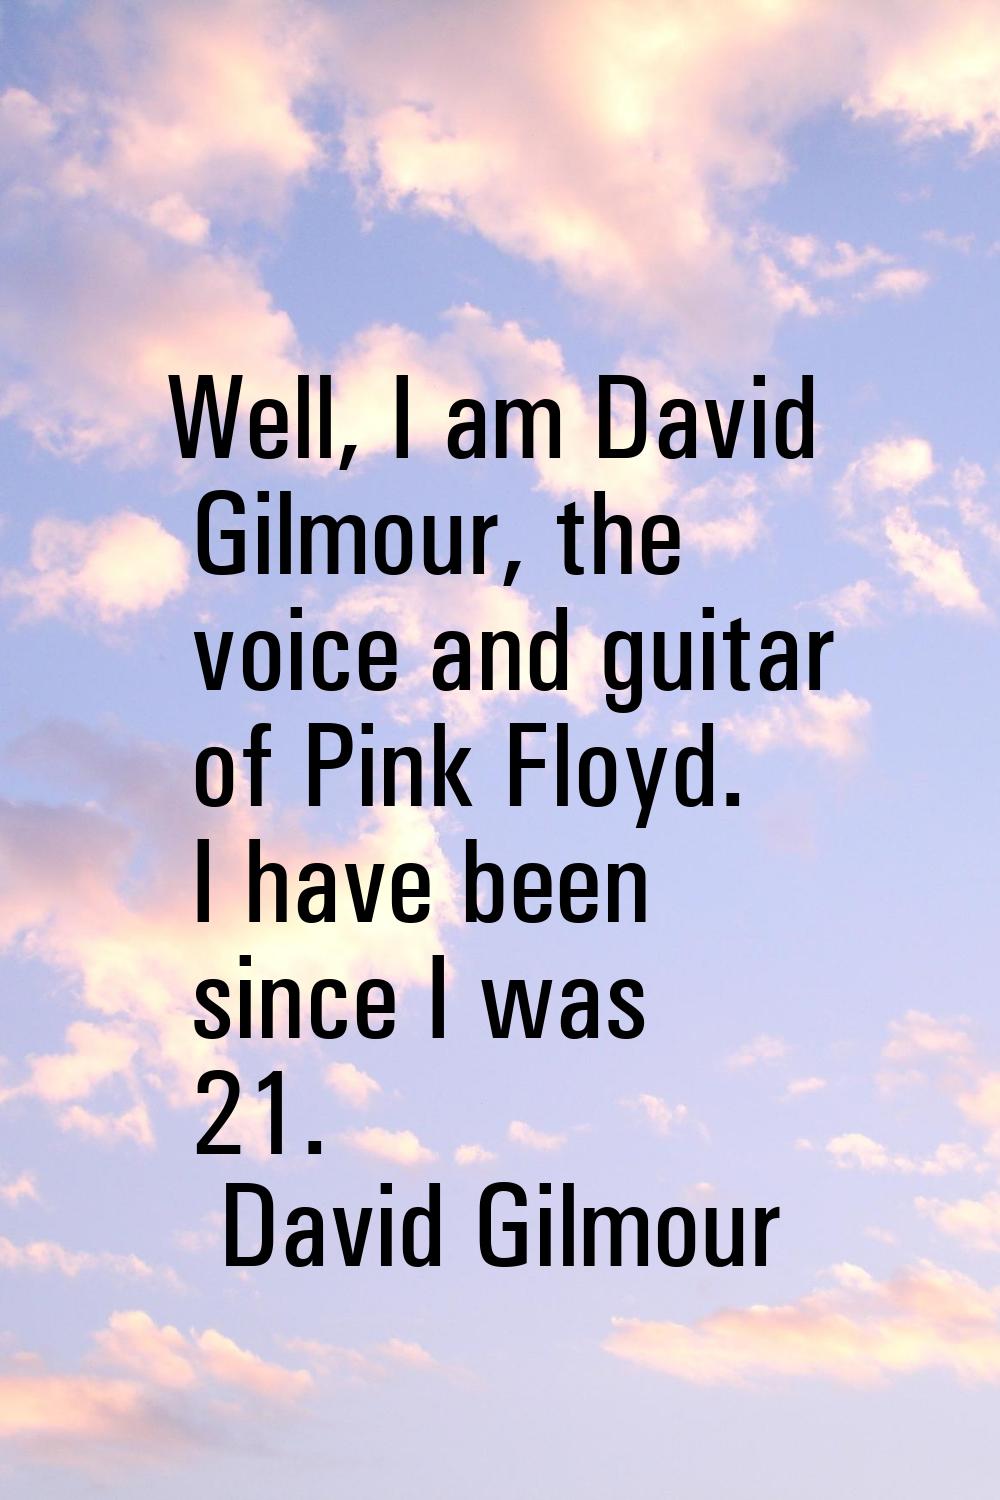 Well, I am David Gilmour, the voice and guitar of Pink Floyd. I have been since I was 21.